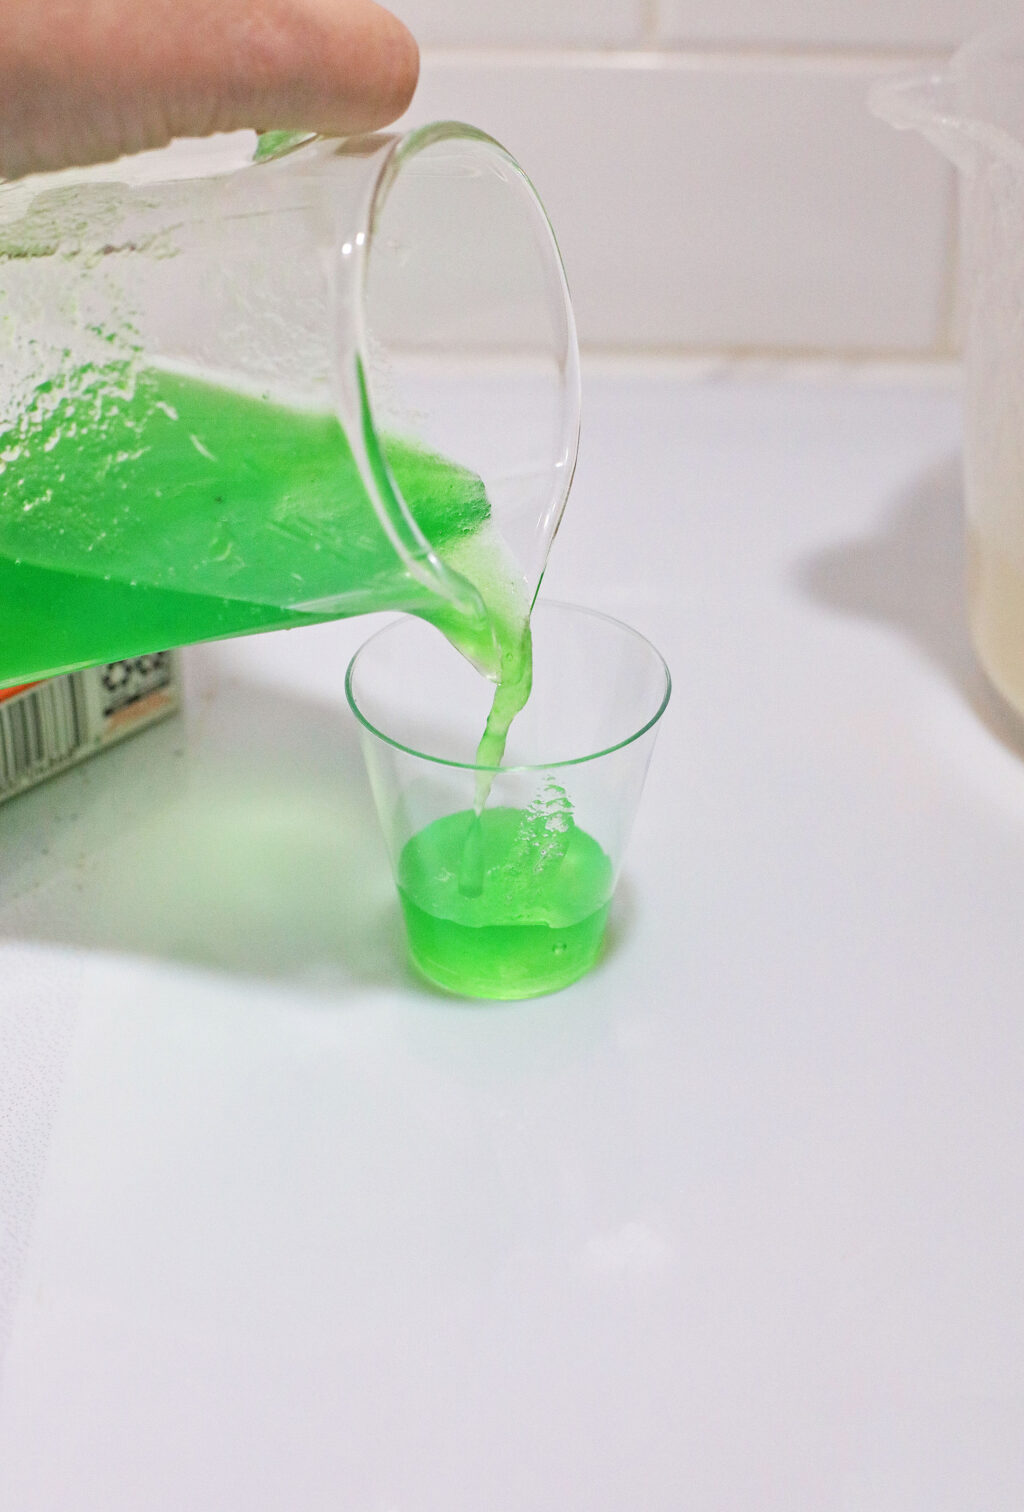 green gelatin mixture pouring into shot glass